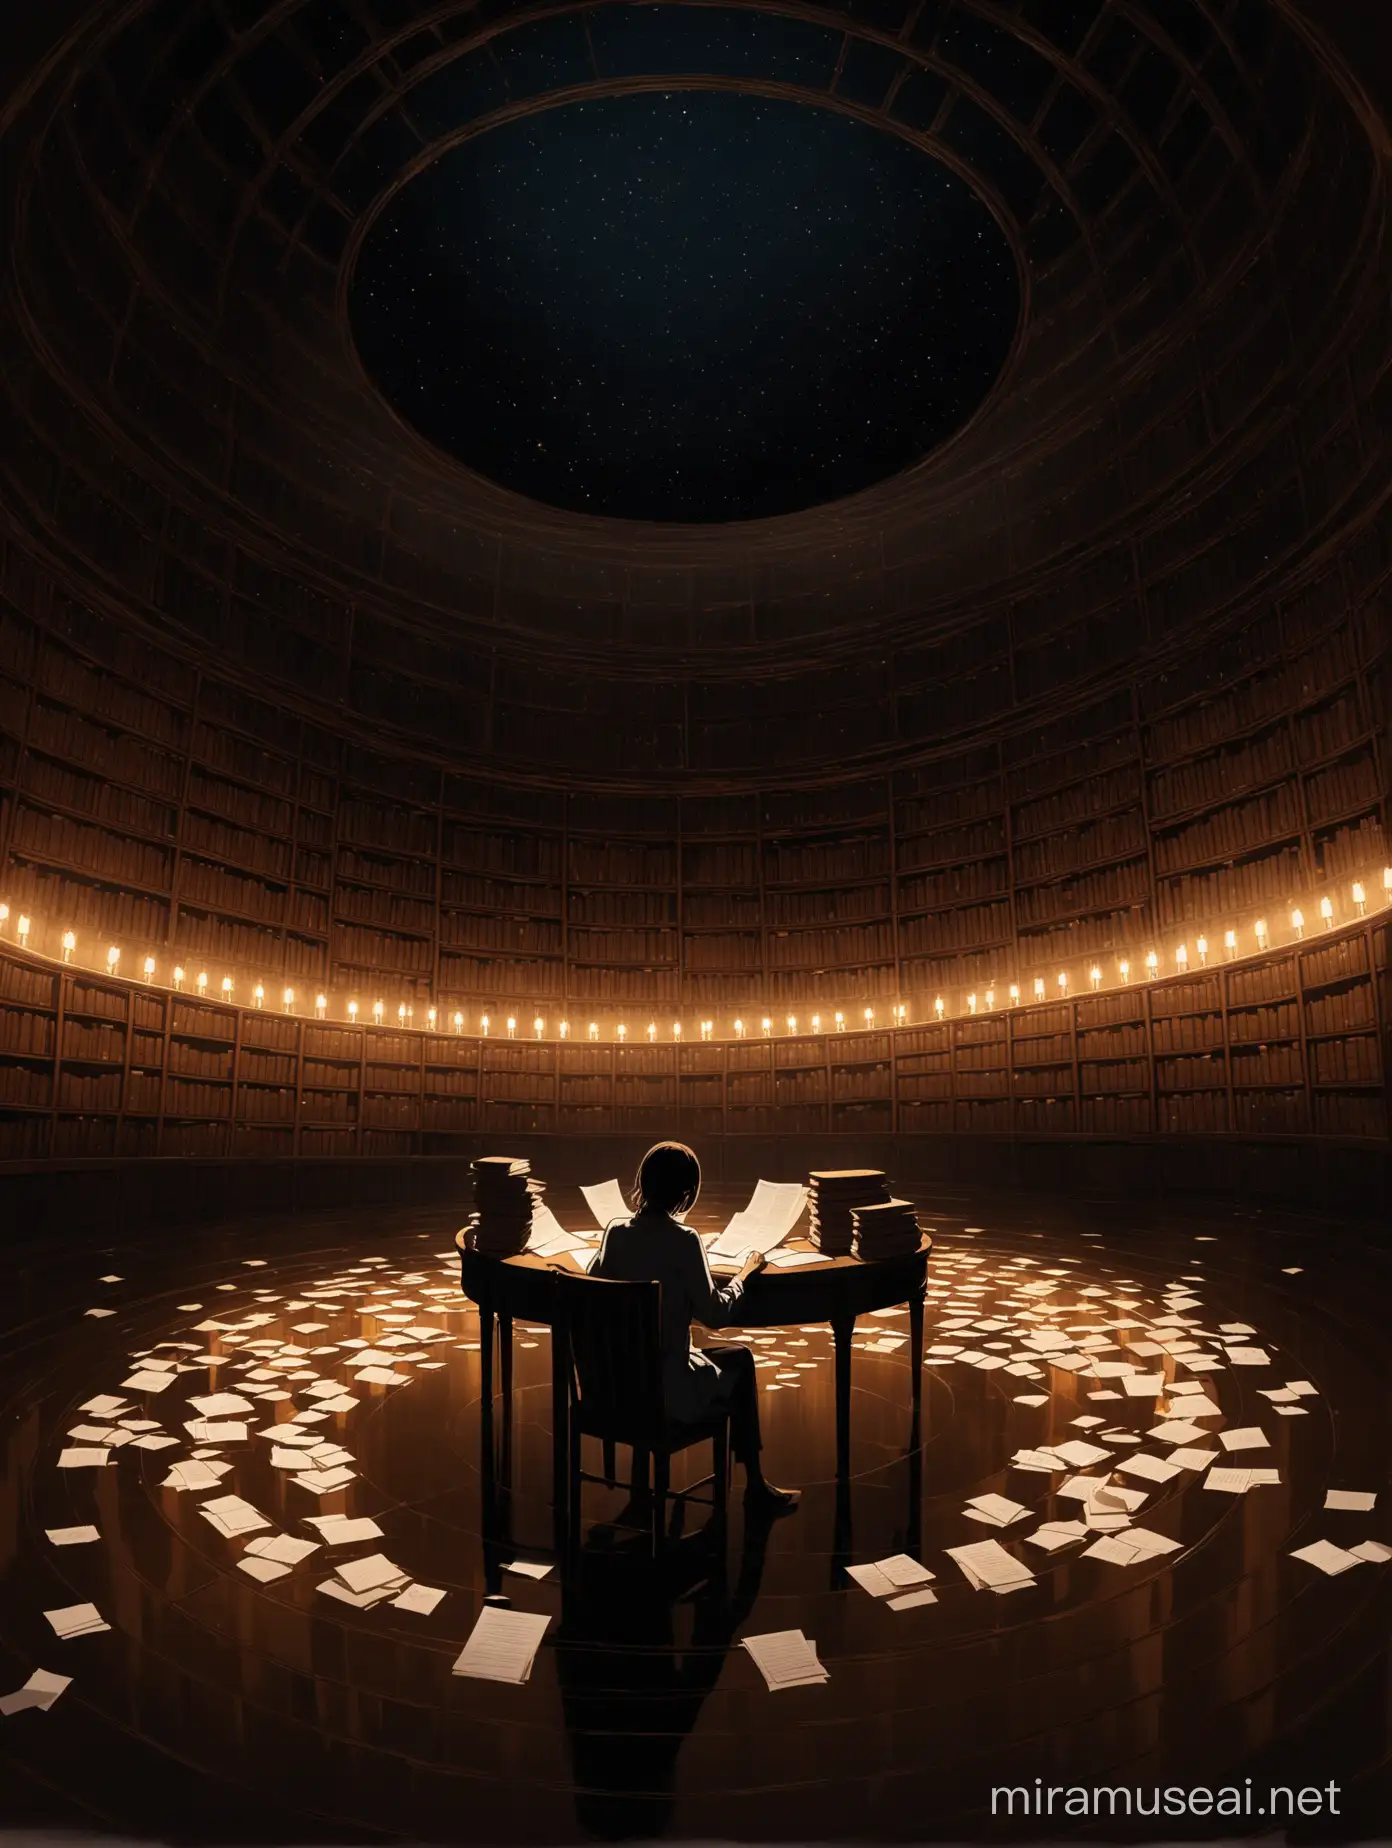  a person sitting alone in the center of a dimly lit circle room, surrounded by books and papers, on the walls there are mirrors reflecting the person